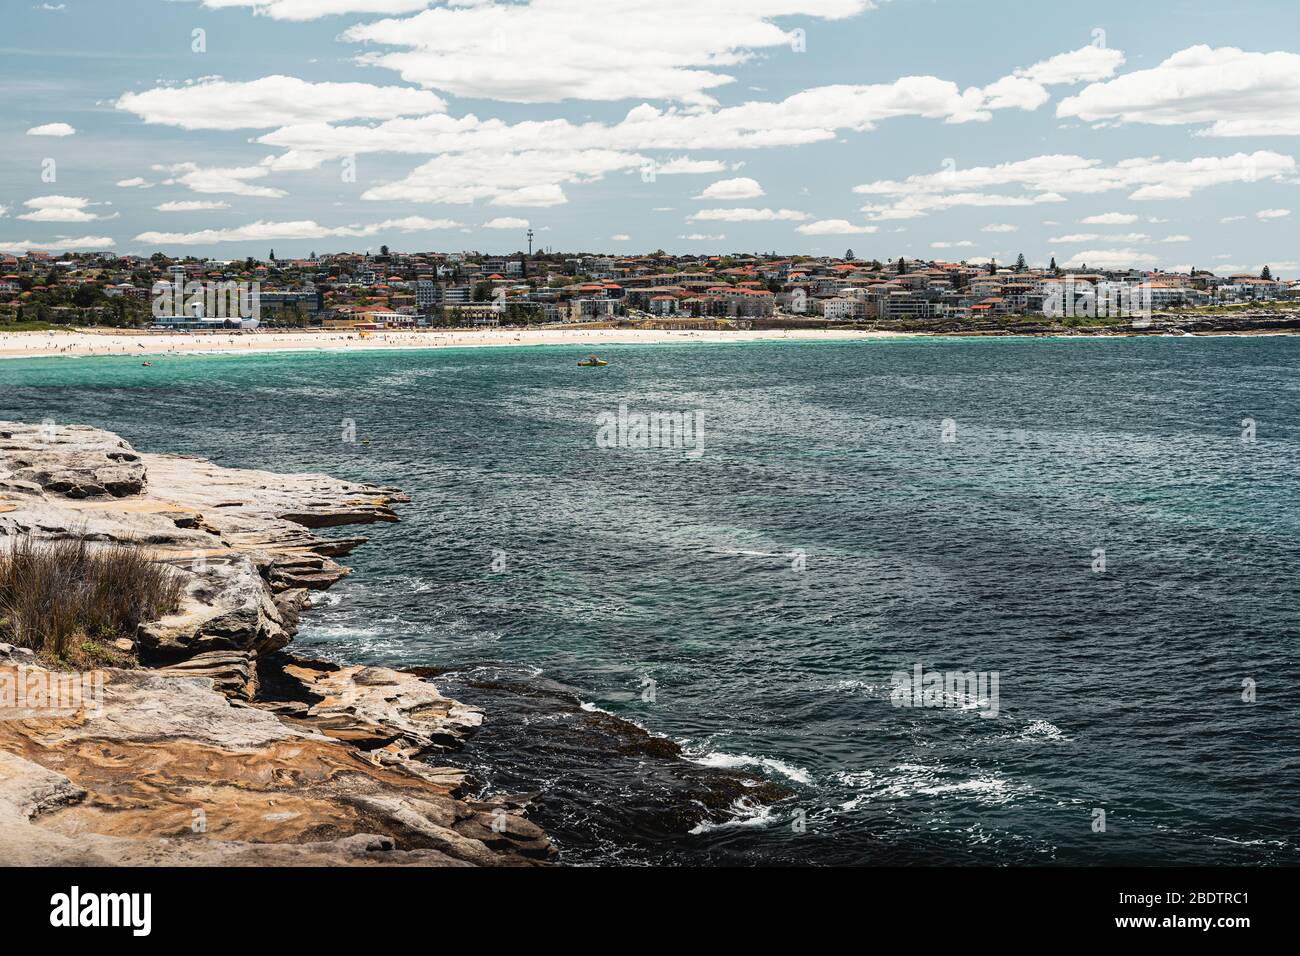 The view of Maroubra Beach on a bright summers day, as seen from the start of the Malabar Headland National Park Coastal Walk. Stock Photo